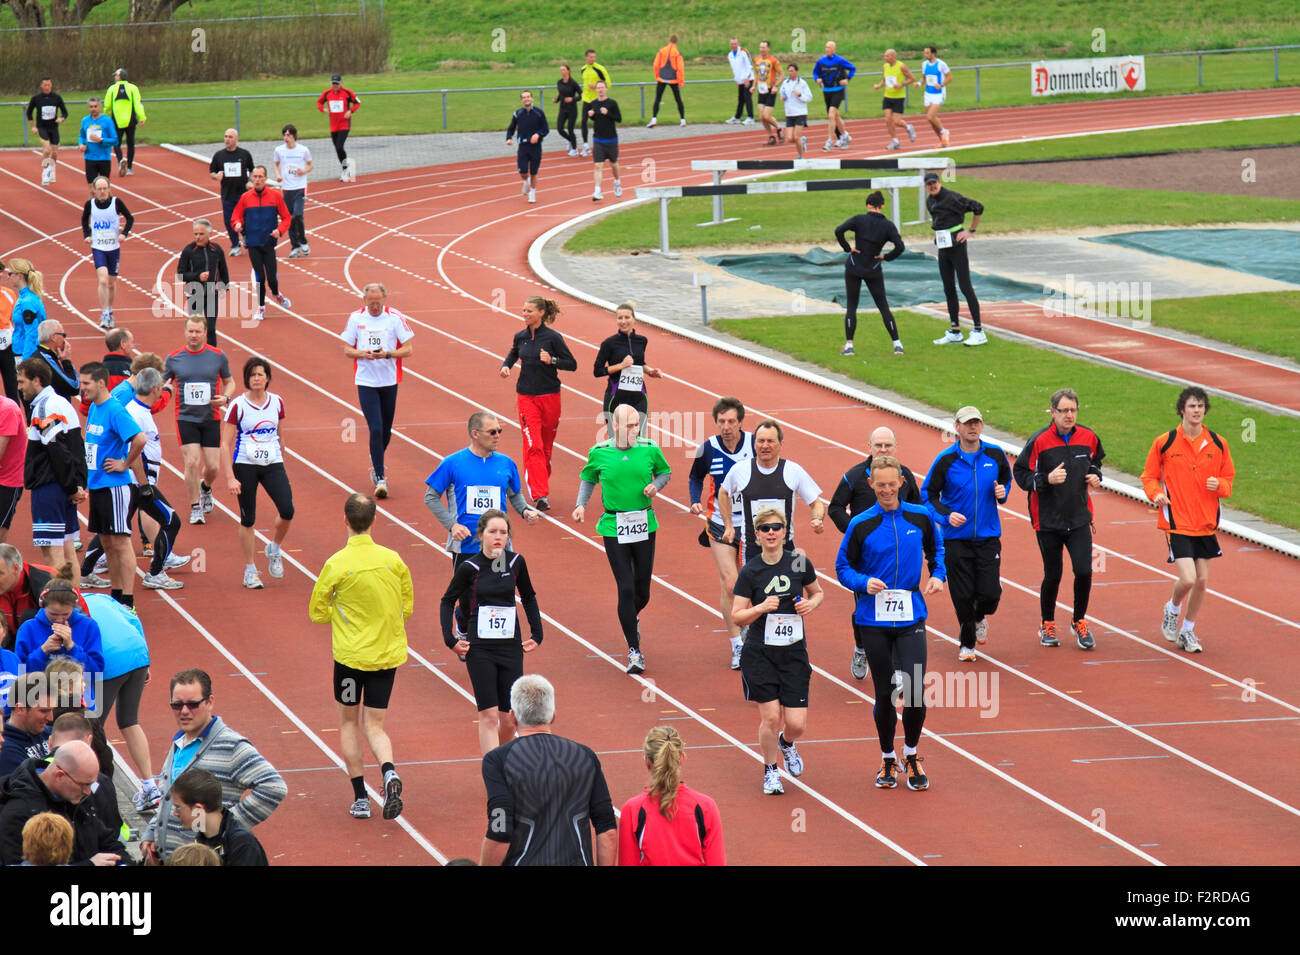 The 65th editing Dwars door Dordt on Sunday 1 April 2012. Runners warming up on the track at the sports stadium Stock Photo